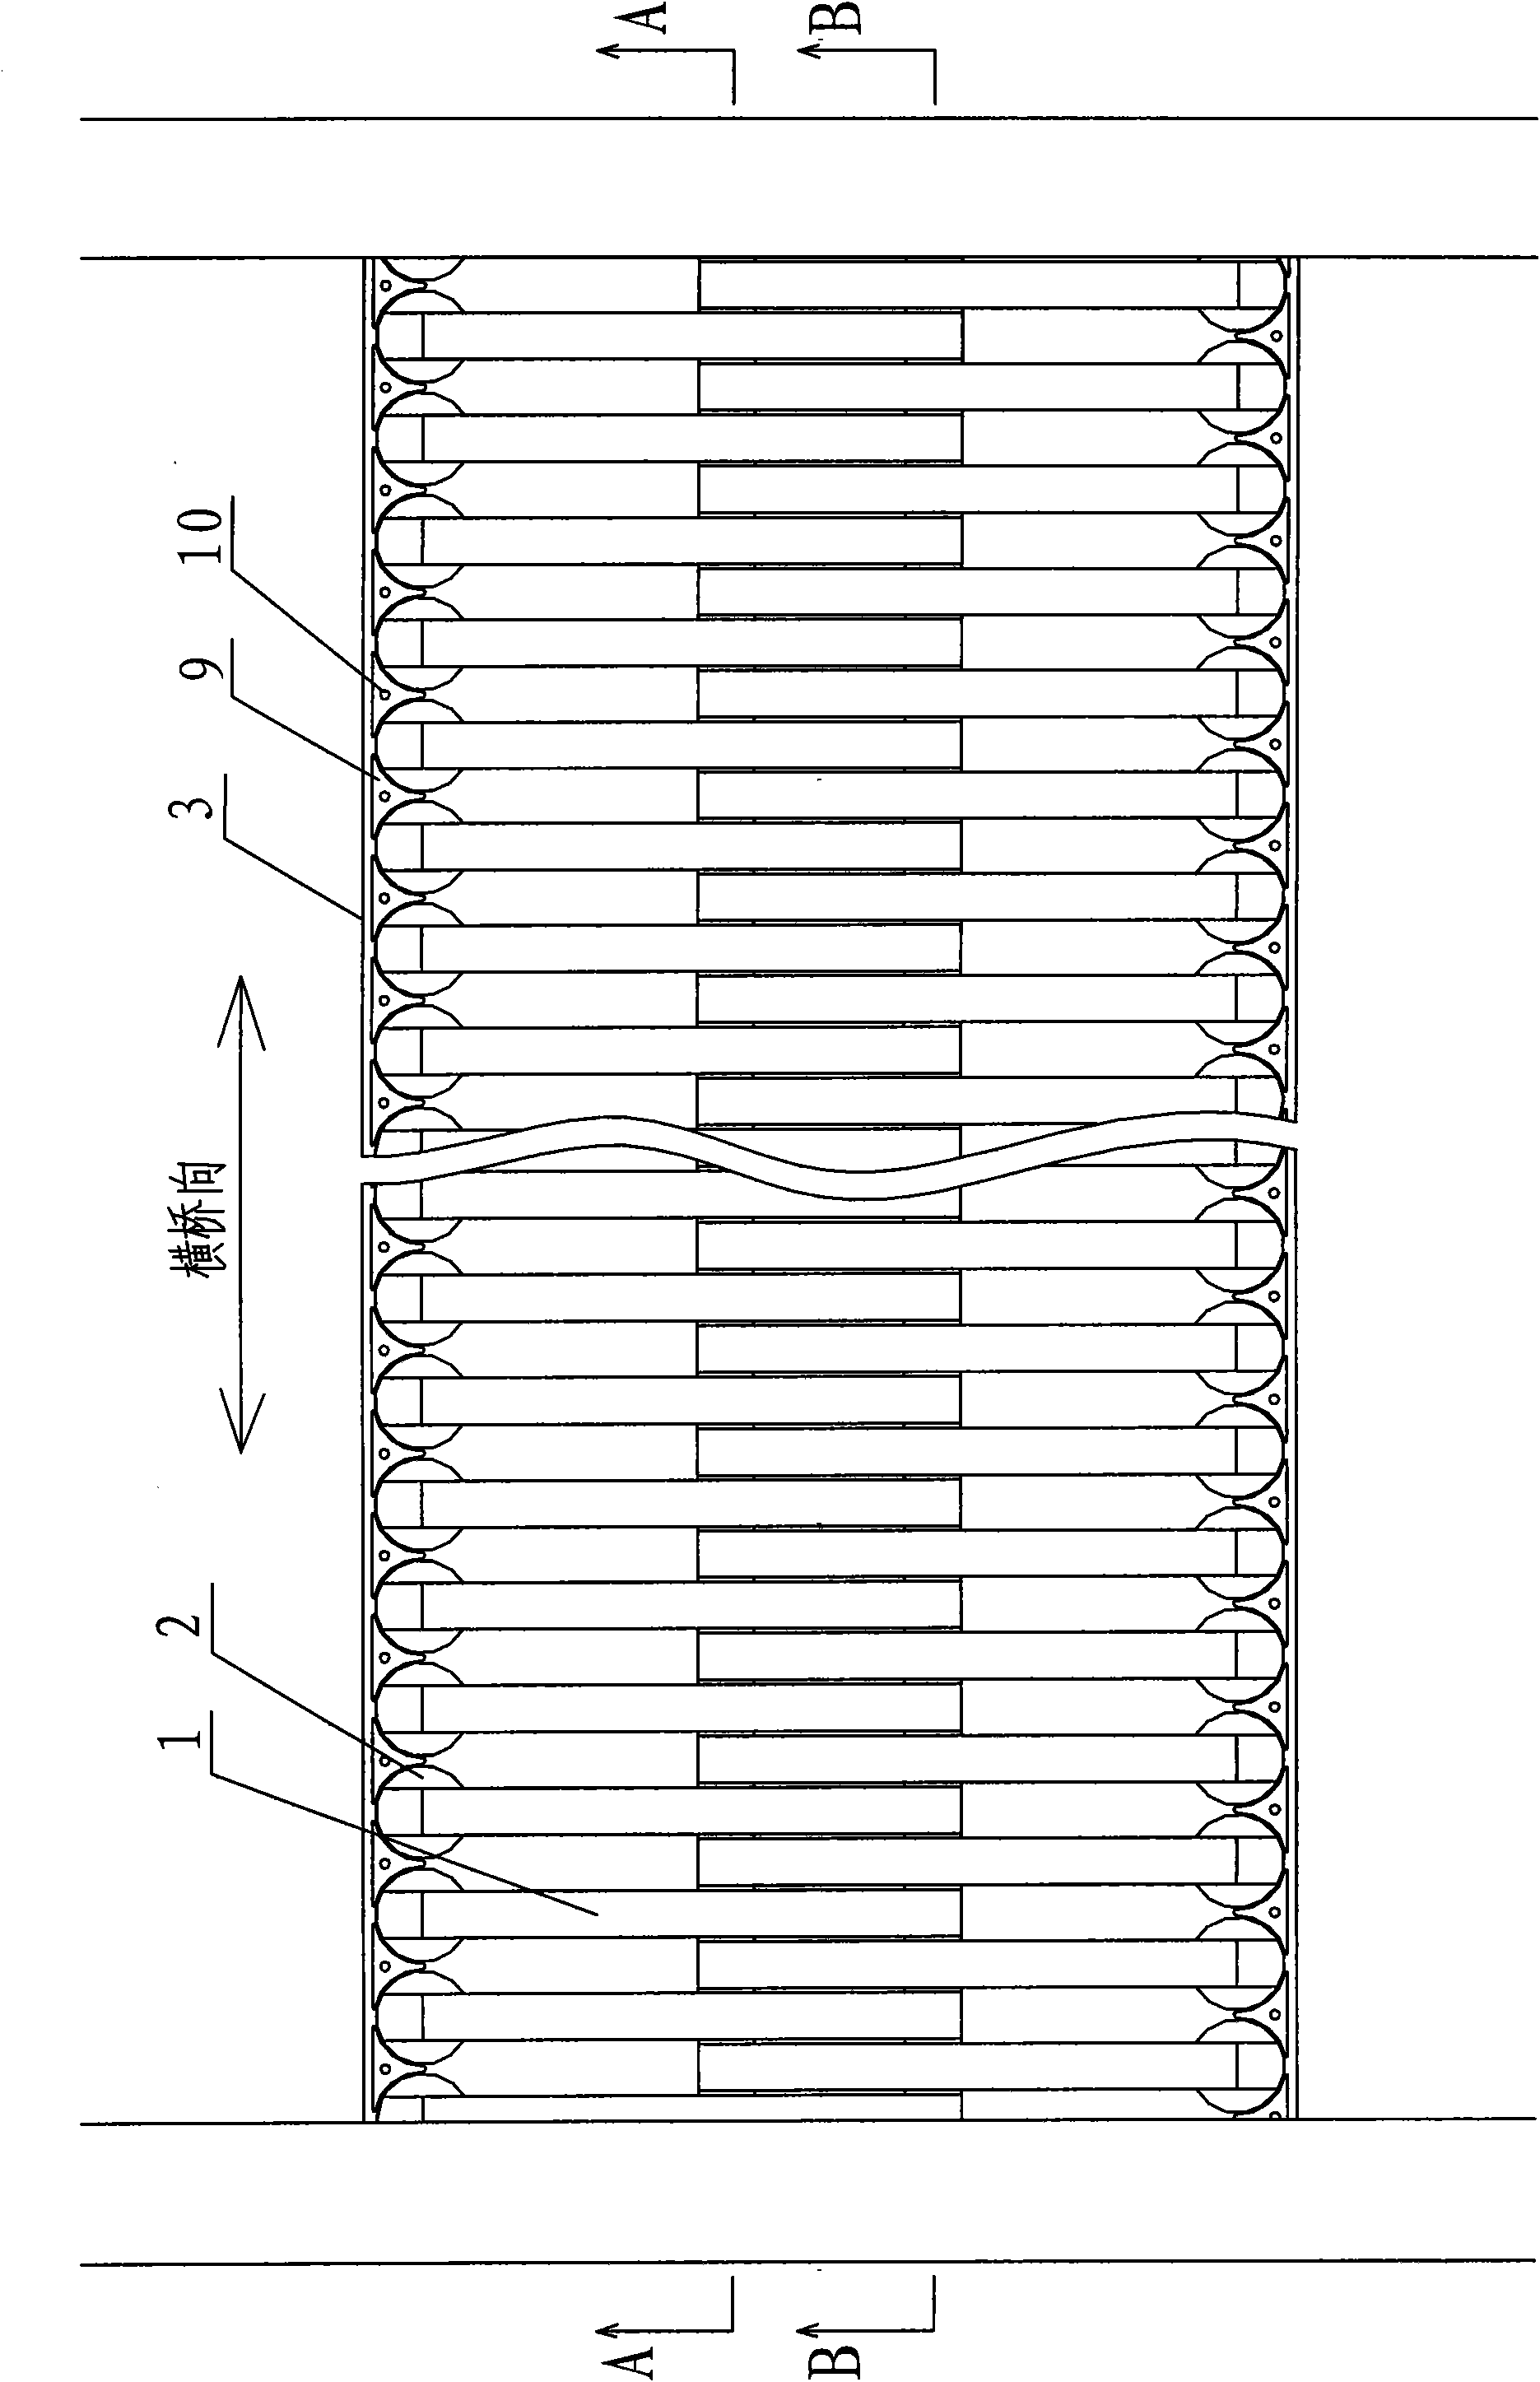 Mutual support type bridge expansion device